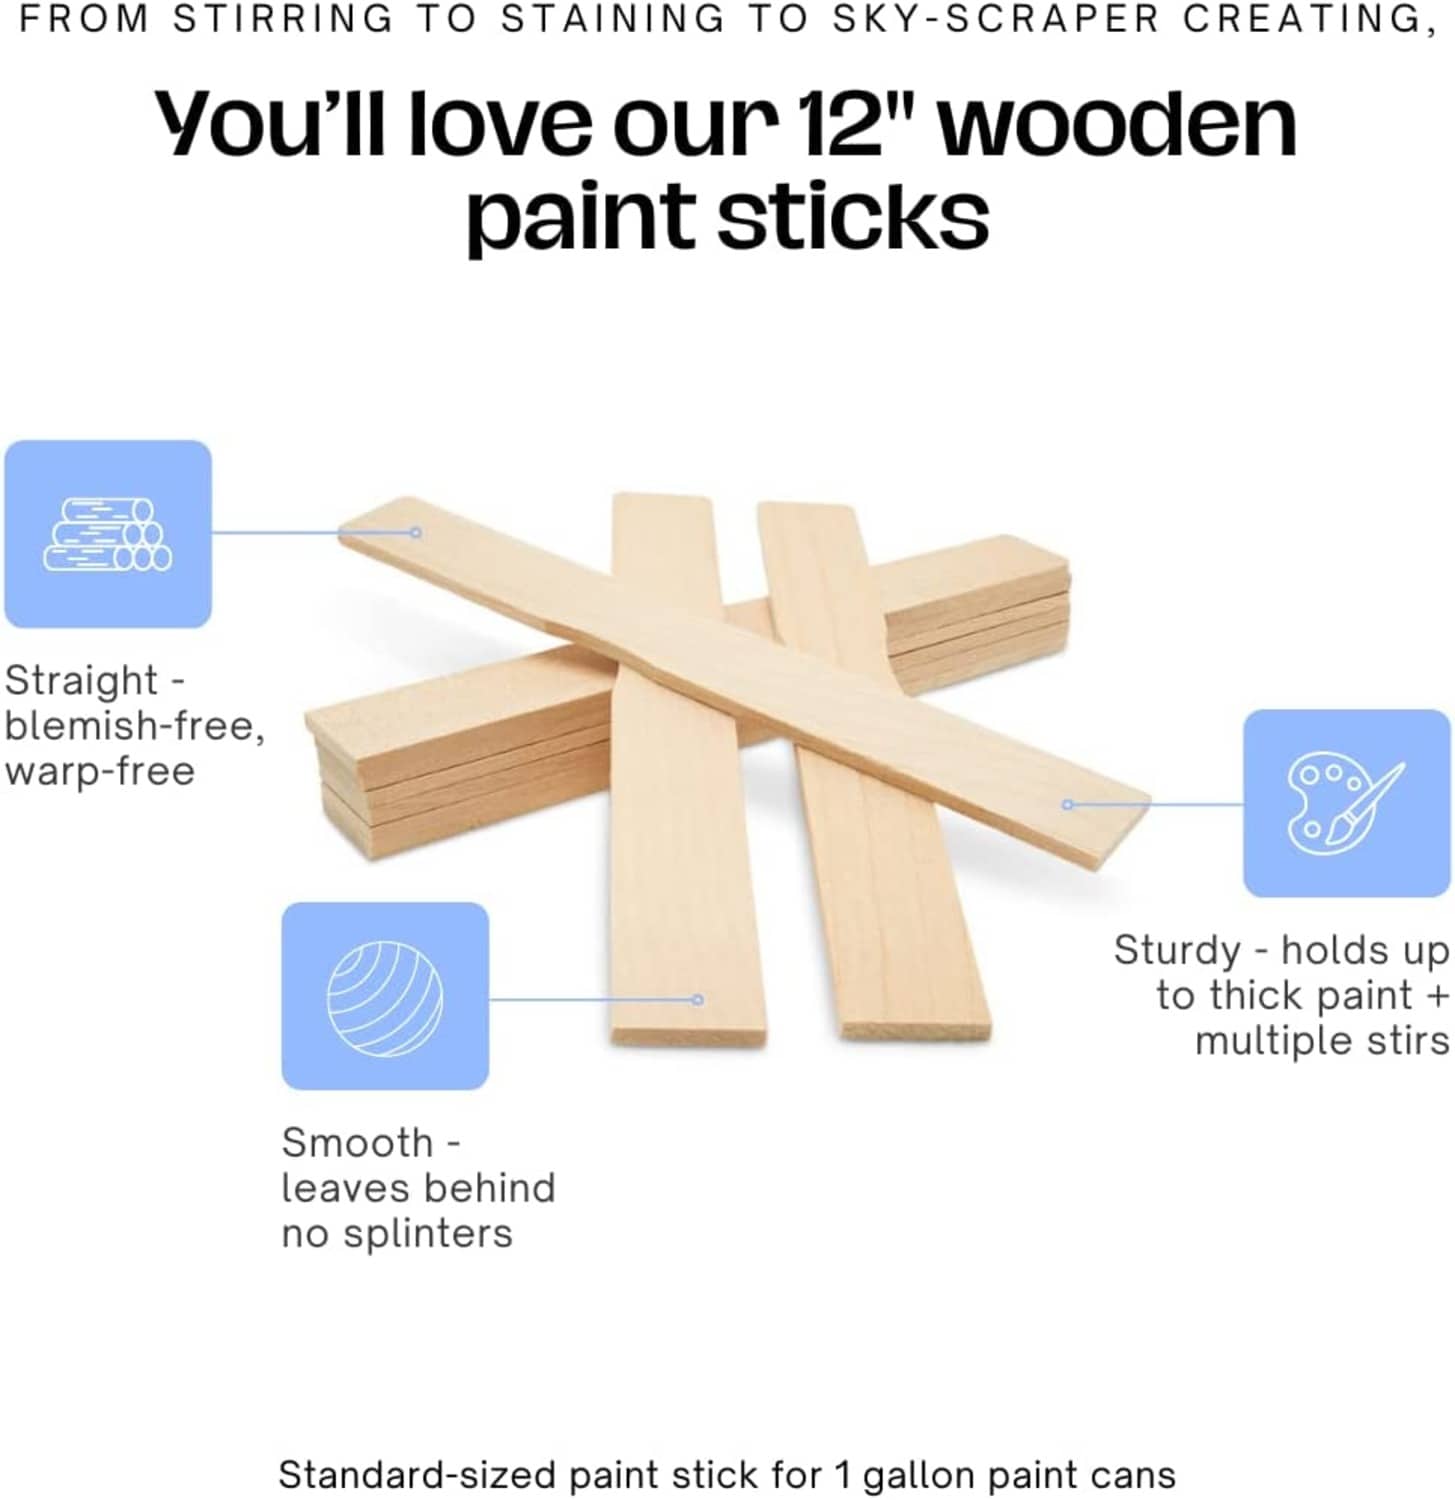  12 Inch Paint Sticks, Box of 25 Hardwood Paint Stirrers, Wood Mixing  Paddles for Epoxy or Resin, Garden or Library Markers by Woodpeckers :  Arts, Crafts & Sewing